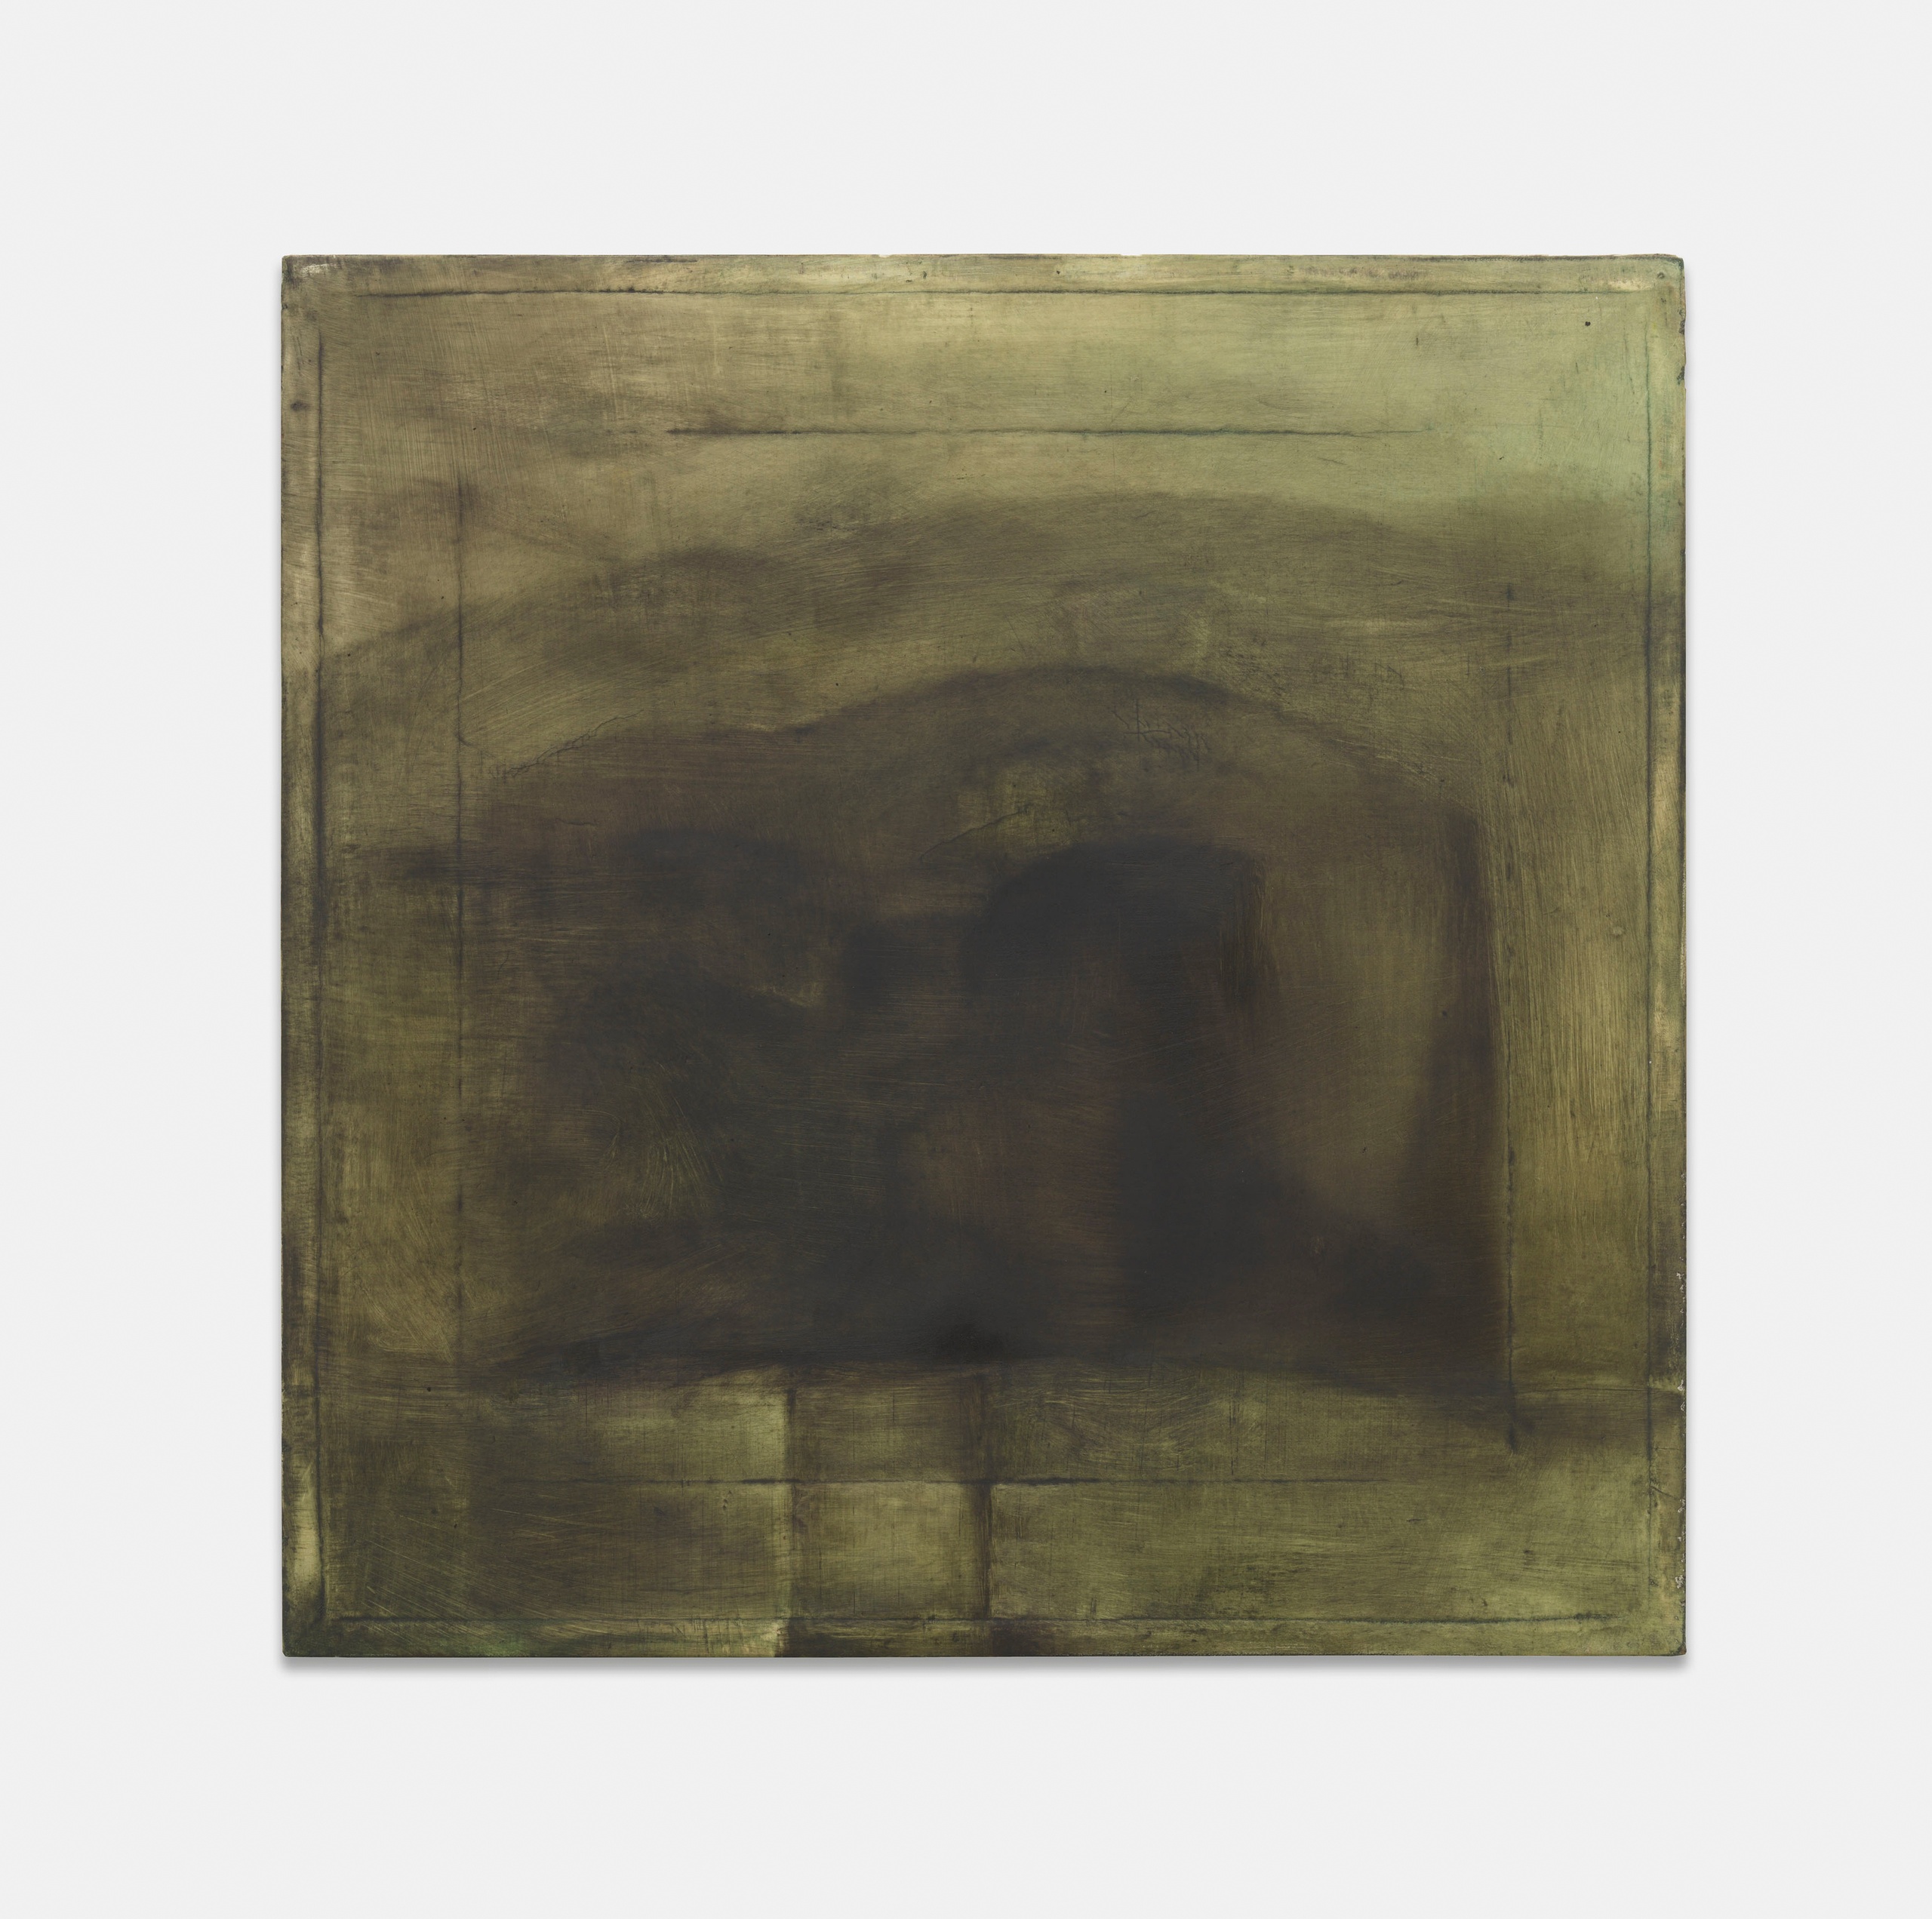 Beaux MendesUntitled, 2022oil on half-chalk ground on muslin30.2 x 30.2 cm | 12 x 12 in